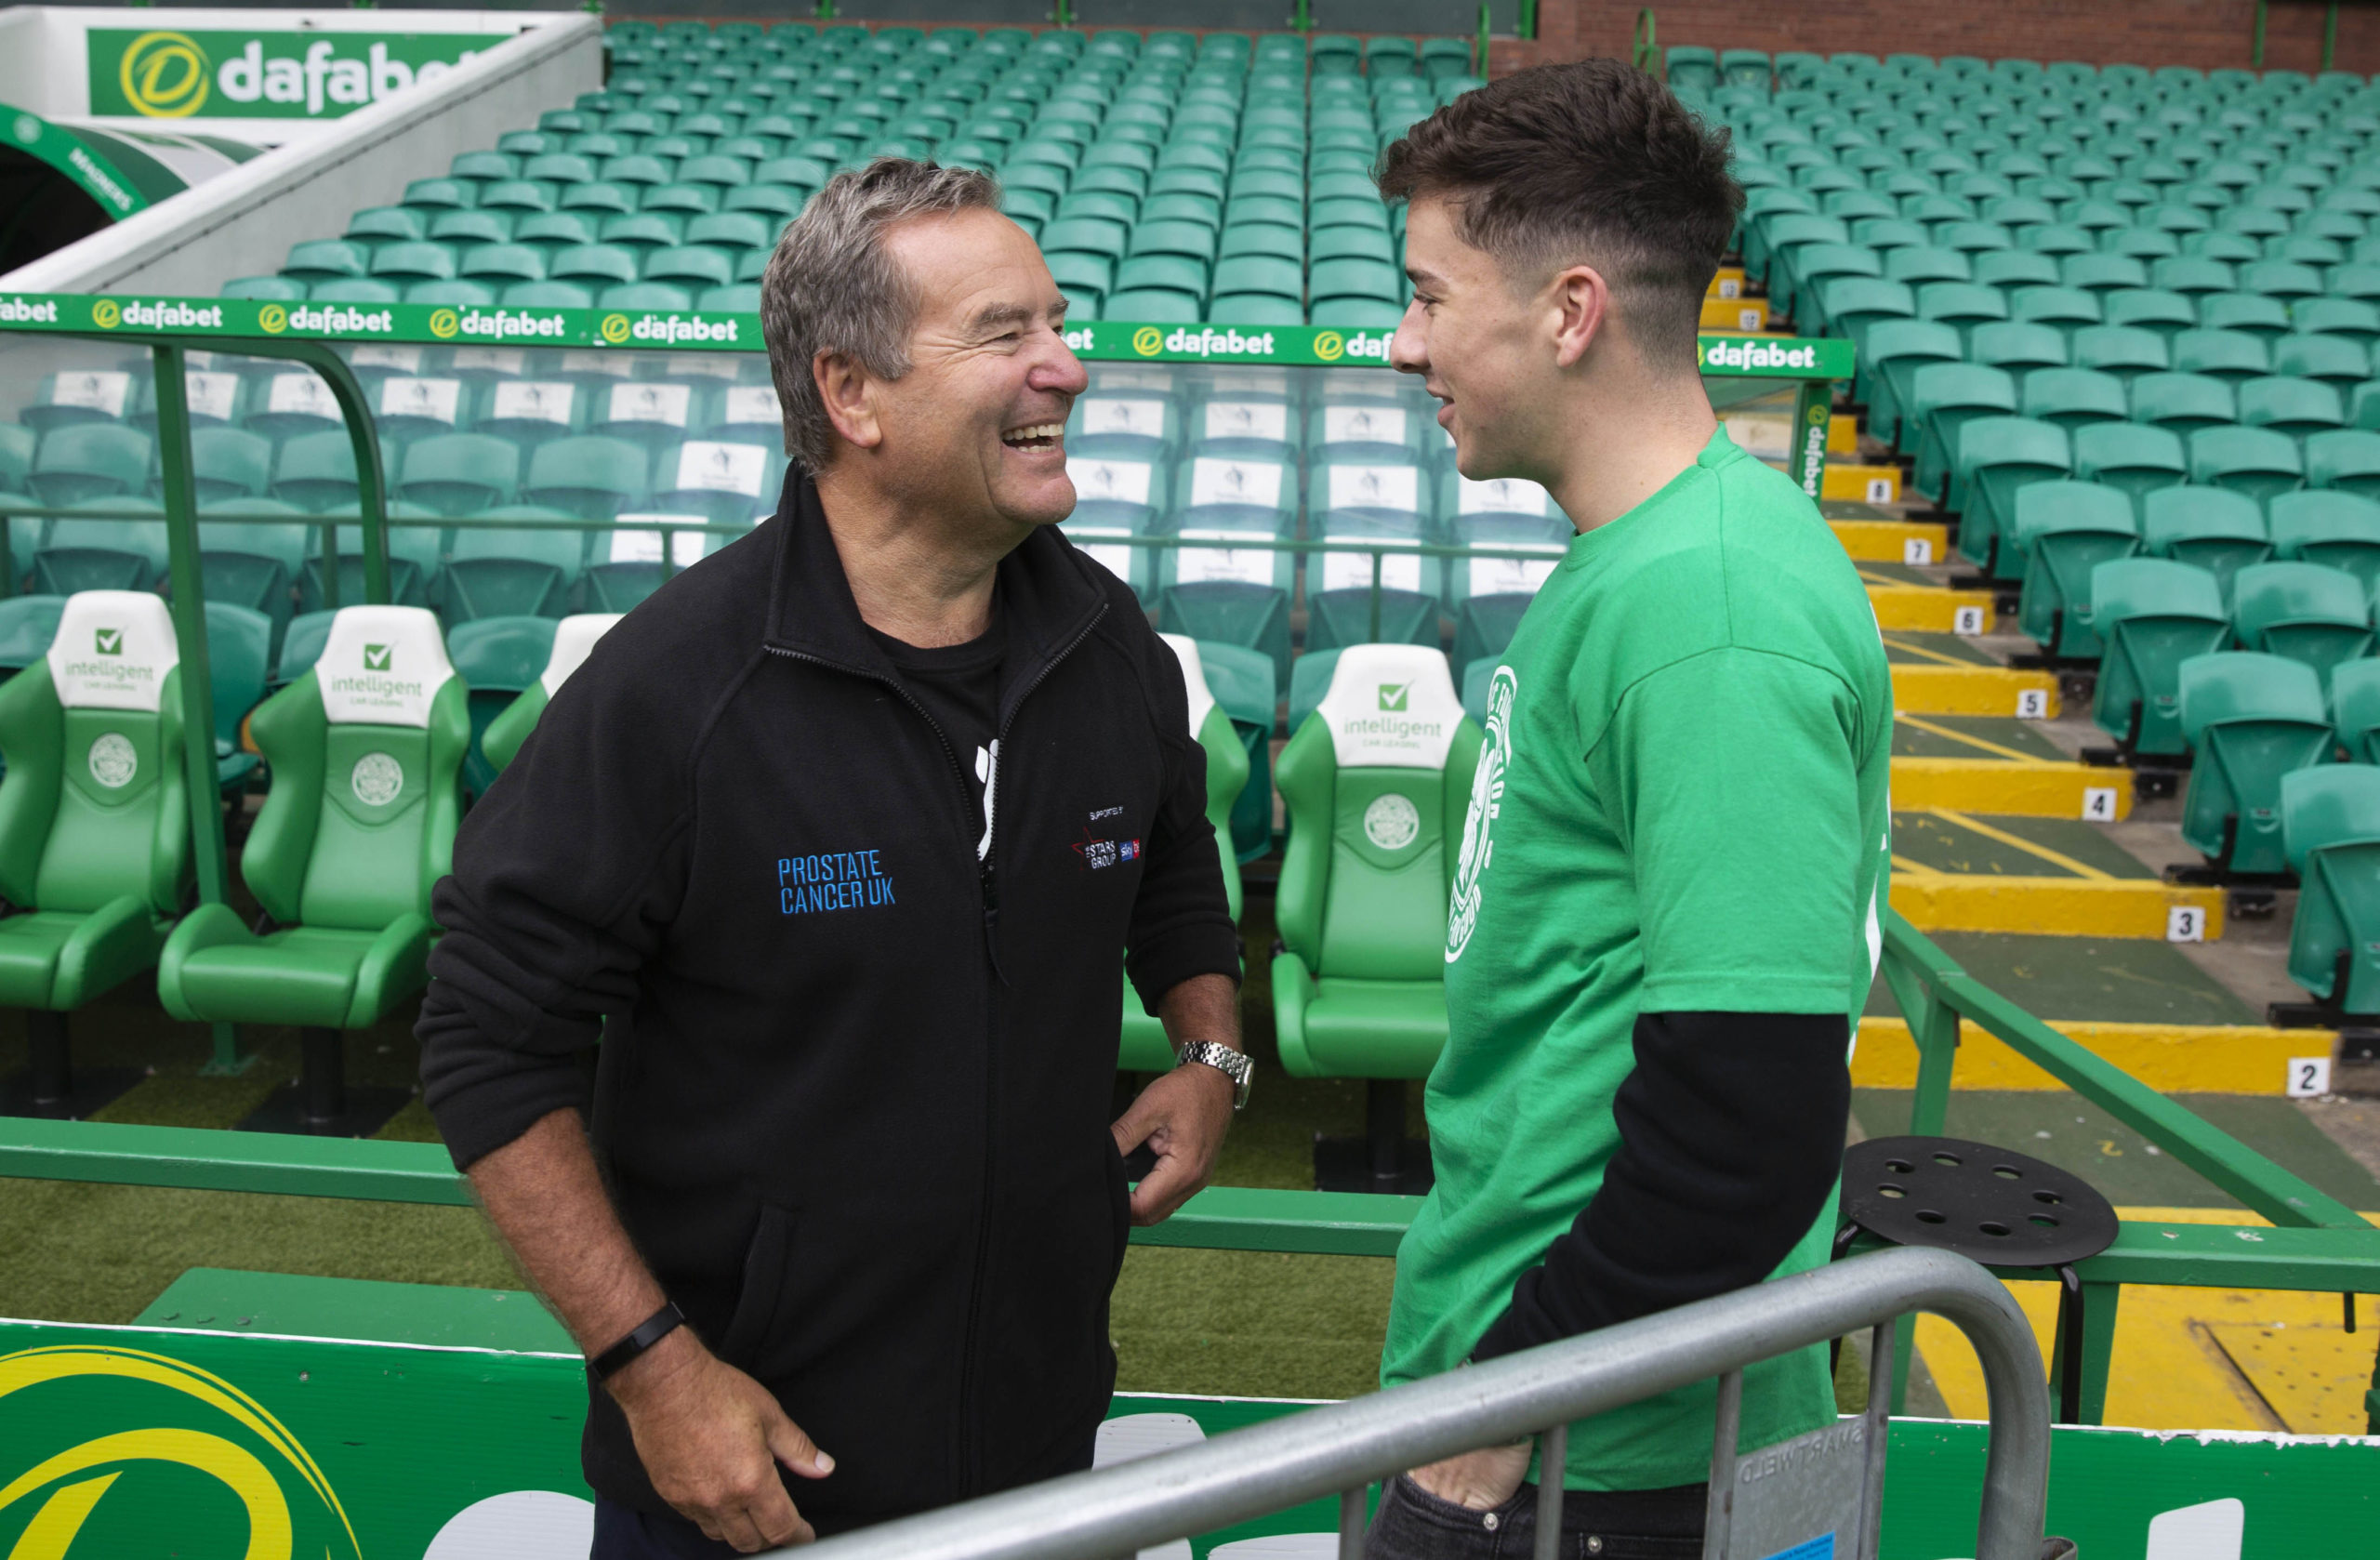 You Can't Be Serious, Jeff: Sky Sports man Jeff Stelling aims cheeky dig at Celtic